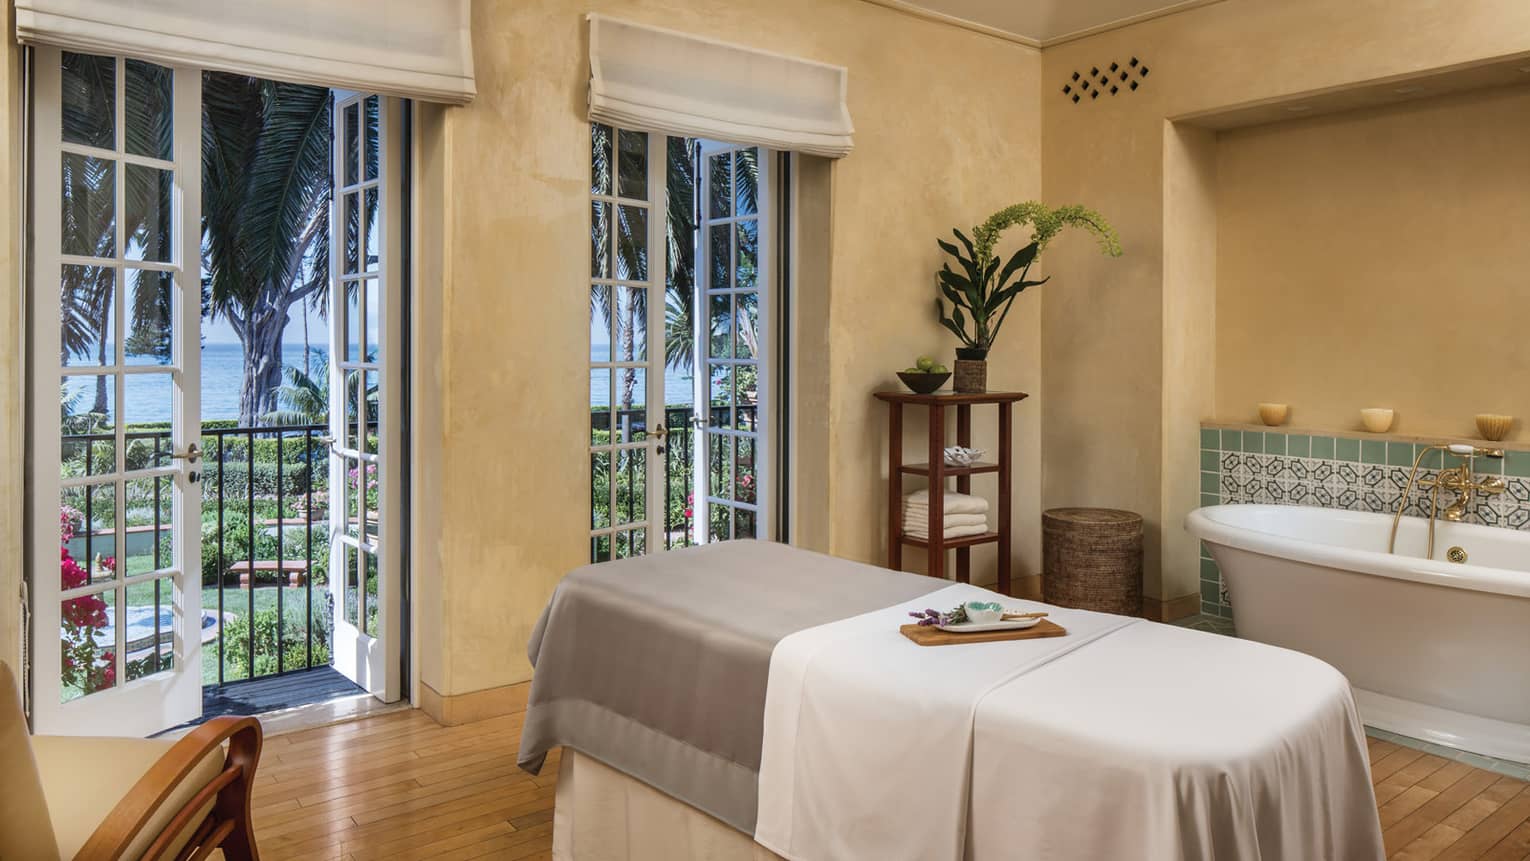 A spa treatment room with massage table, bath tub, wooden floors, French doors to a garden